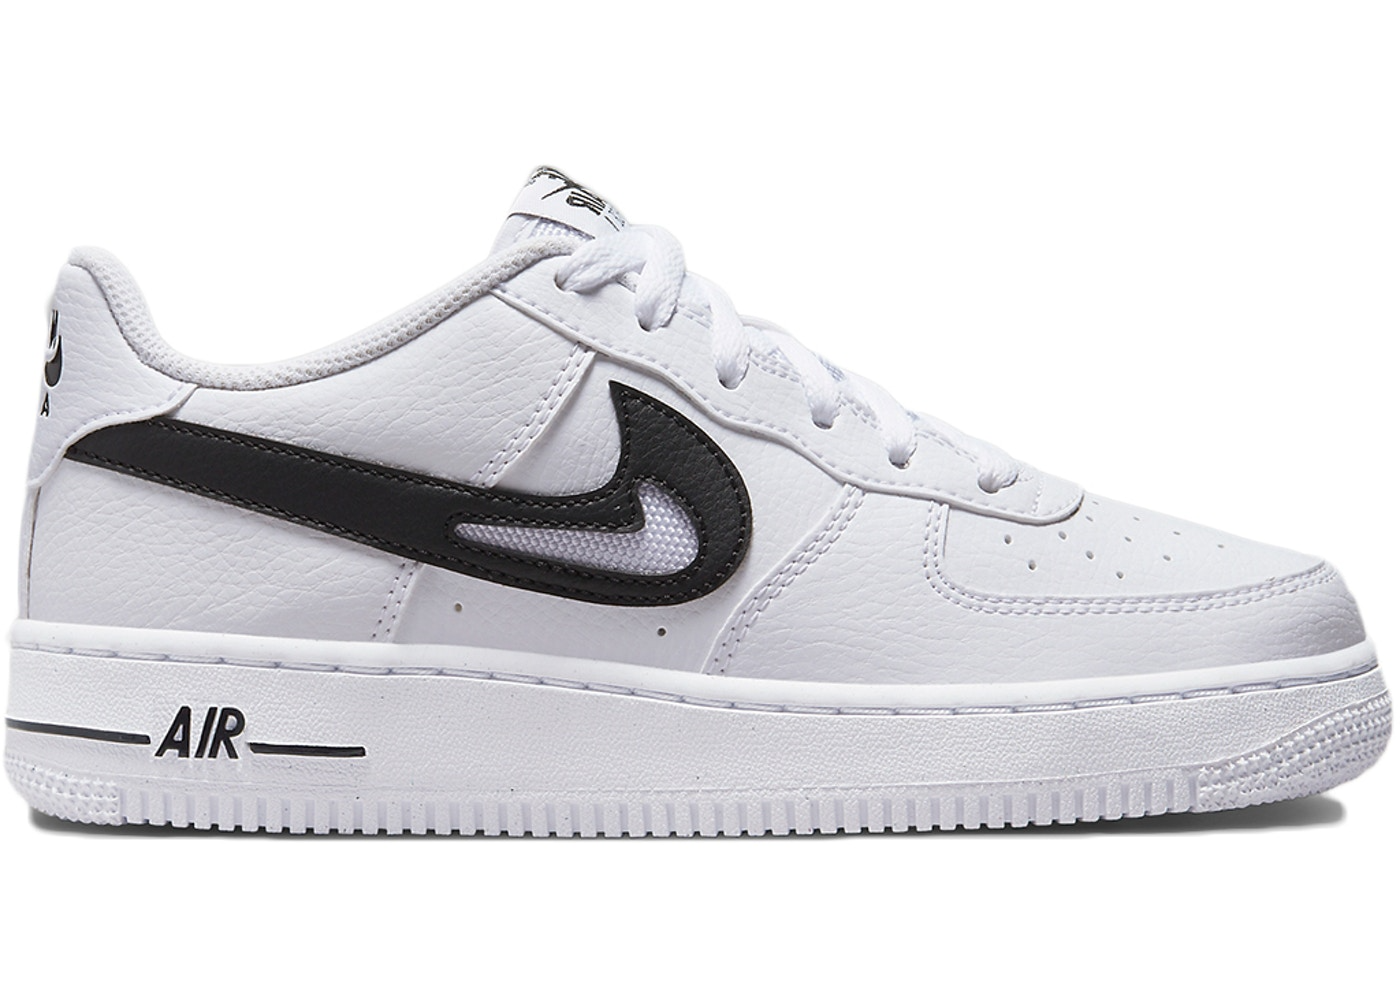 Now Available: GS Nike Air Force 1 Low Cut Out Swoosh "White Black